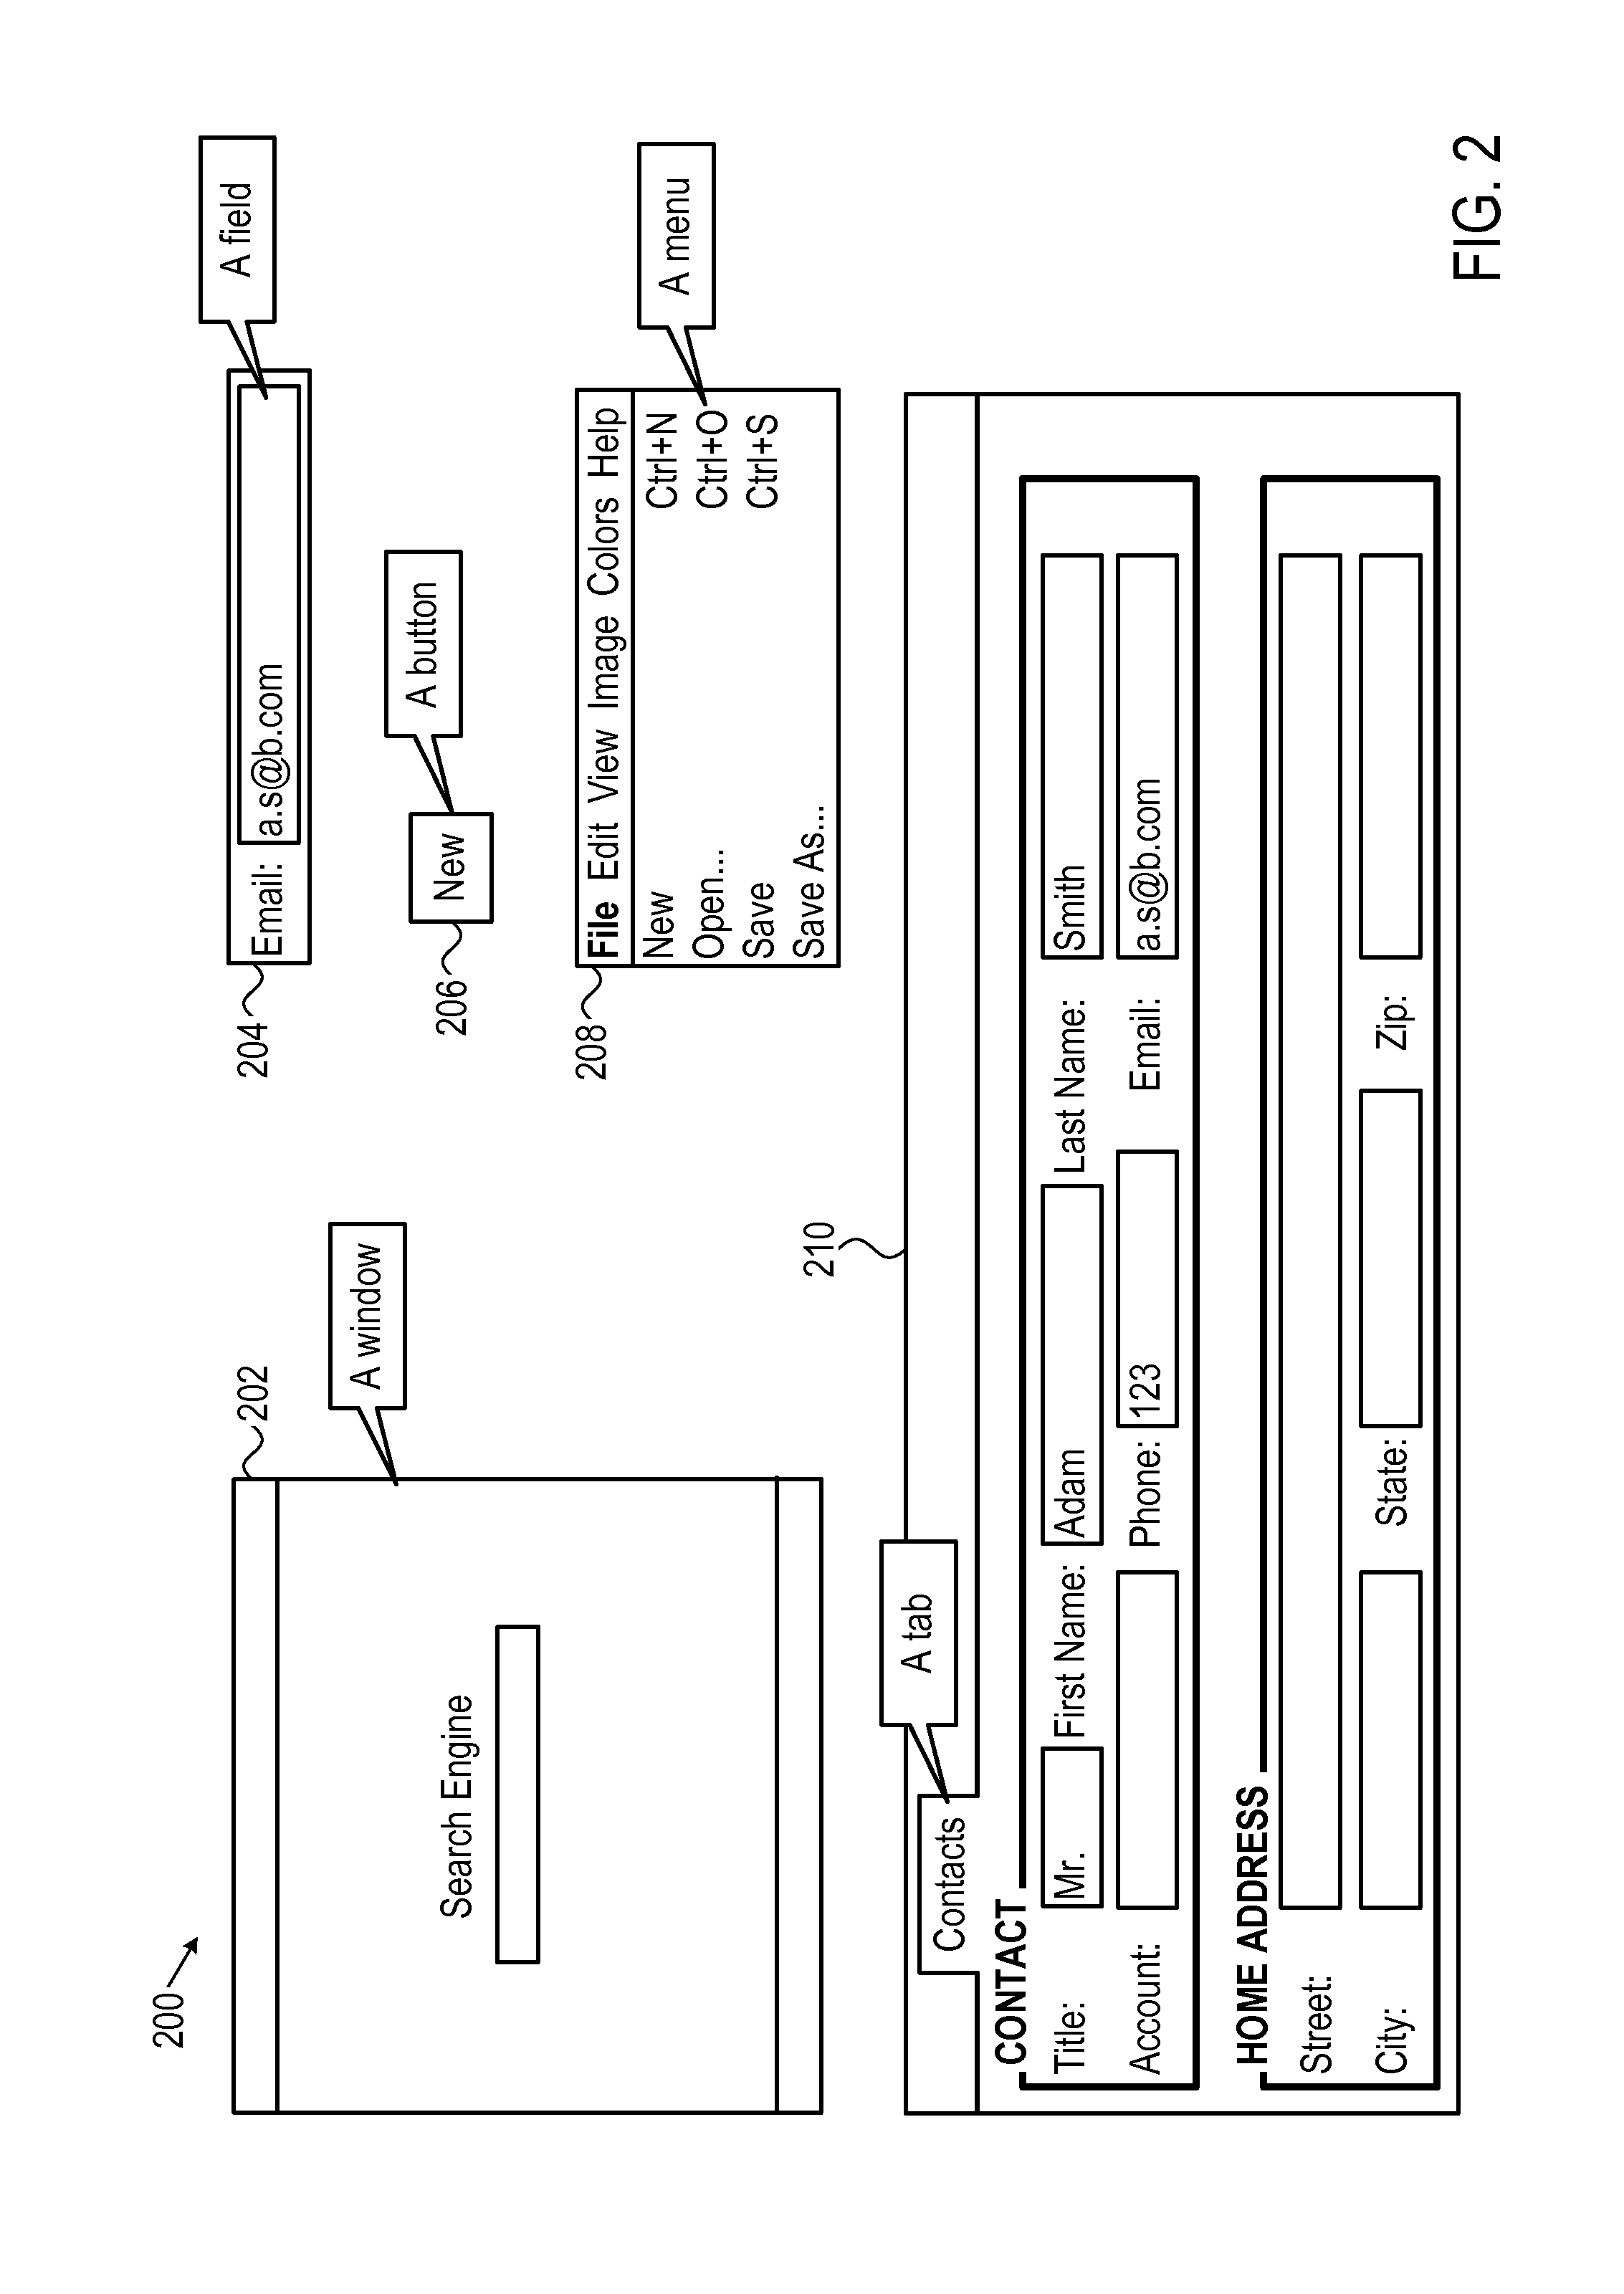 System and method for developing and testing logic in a mock-up environment